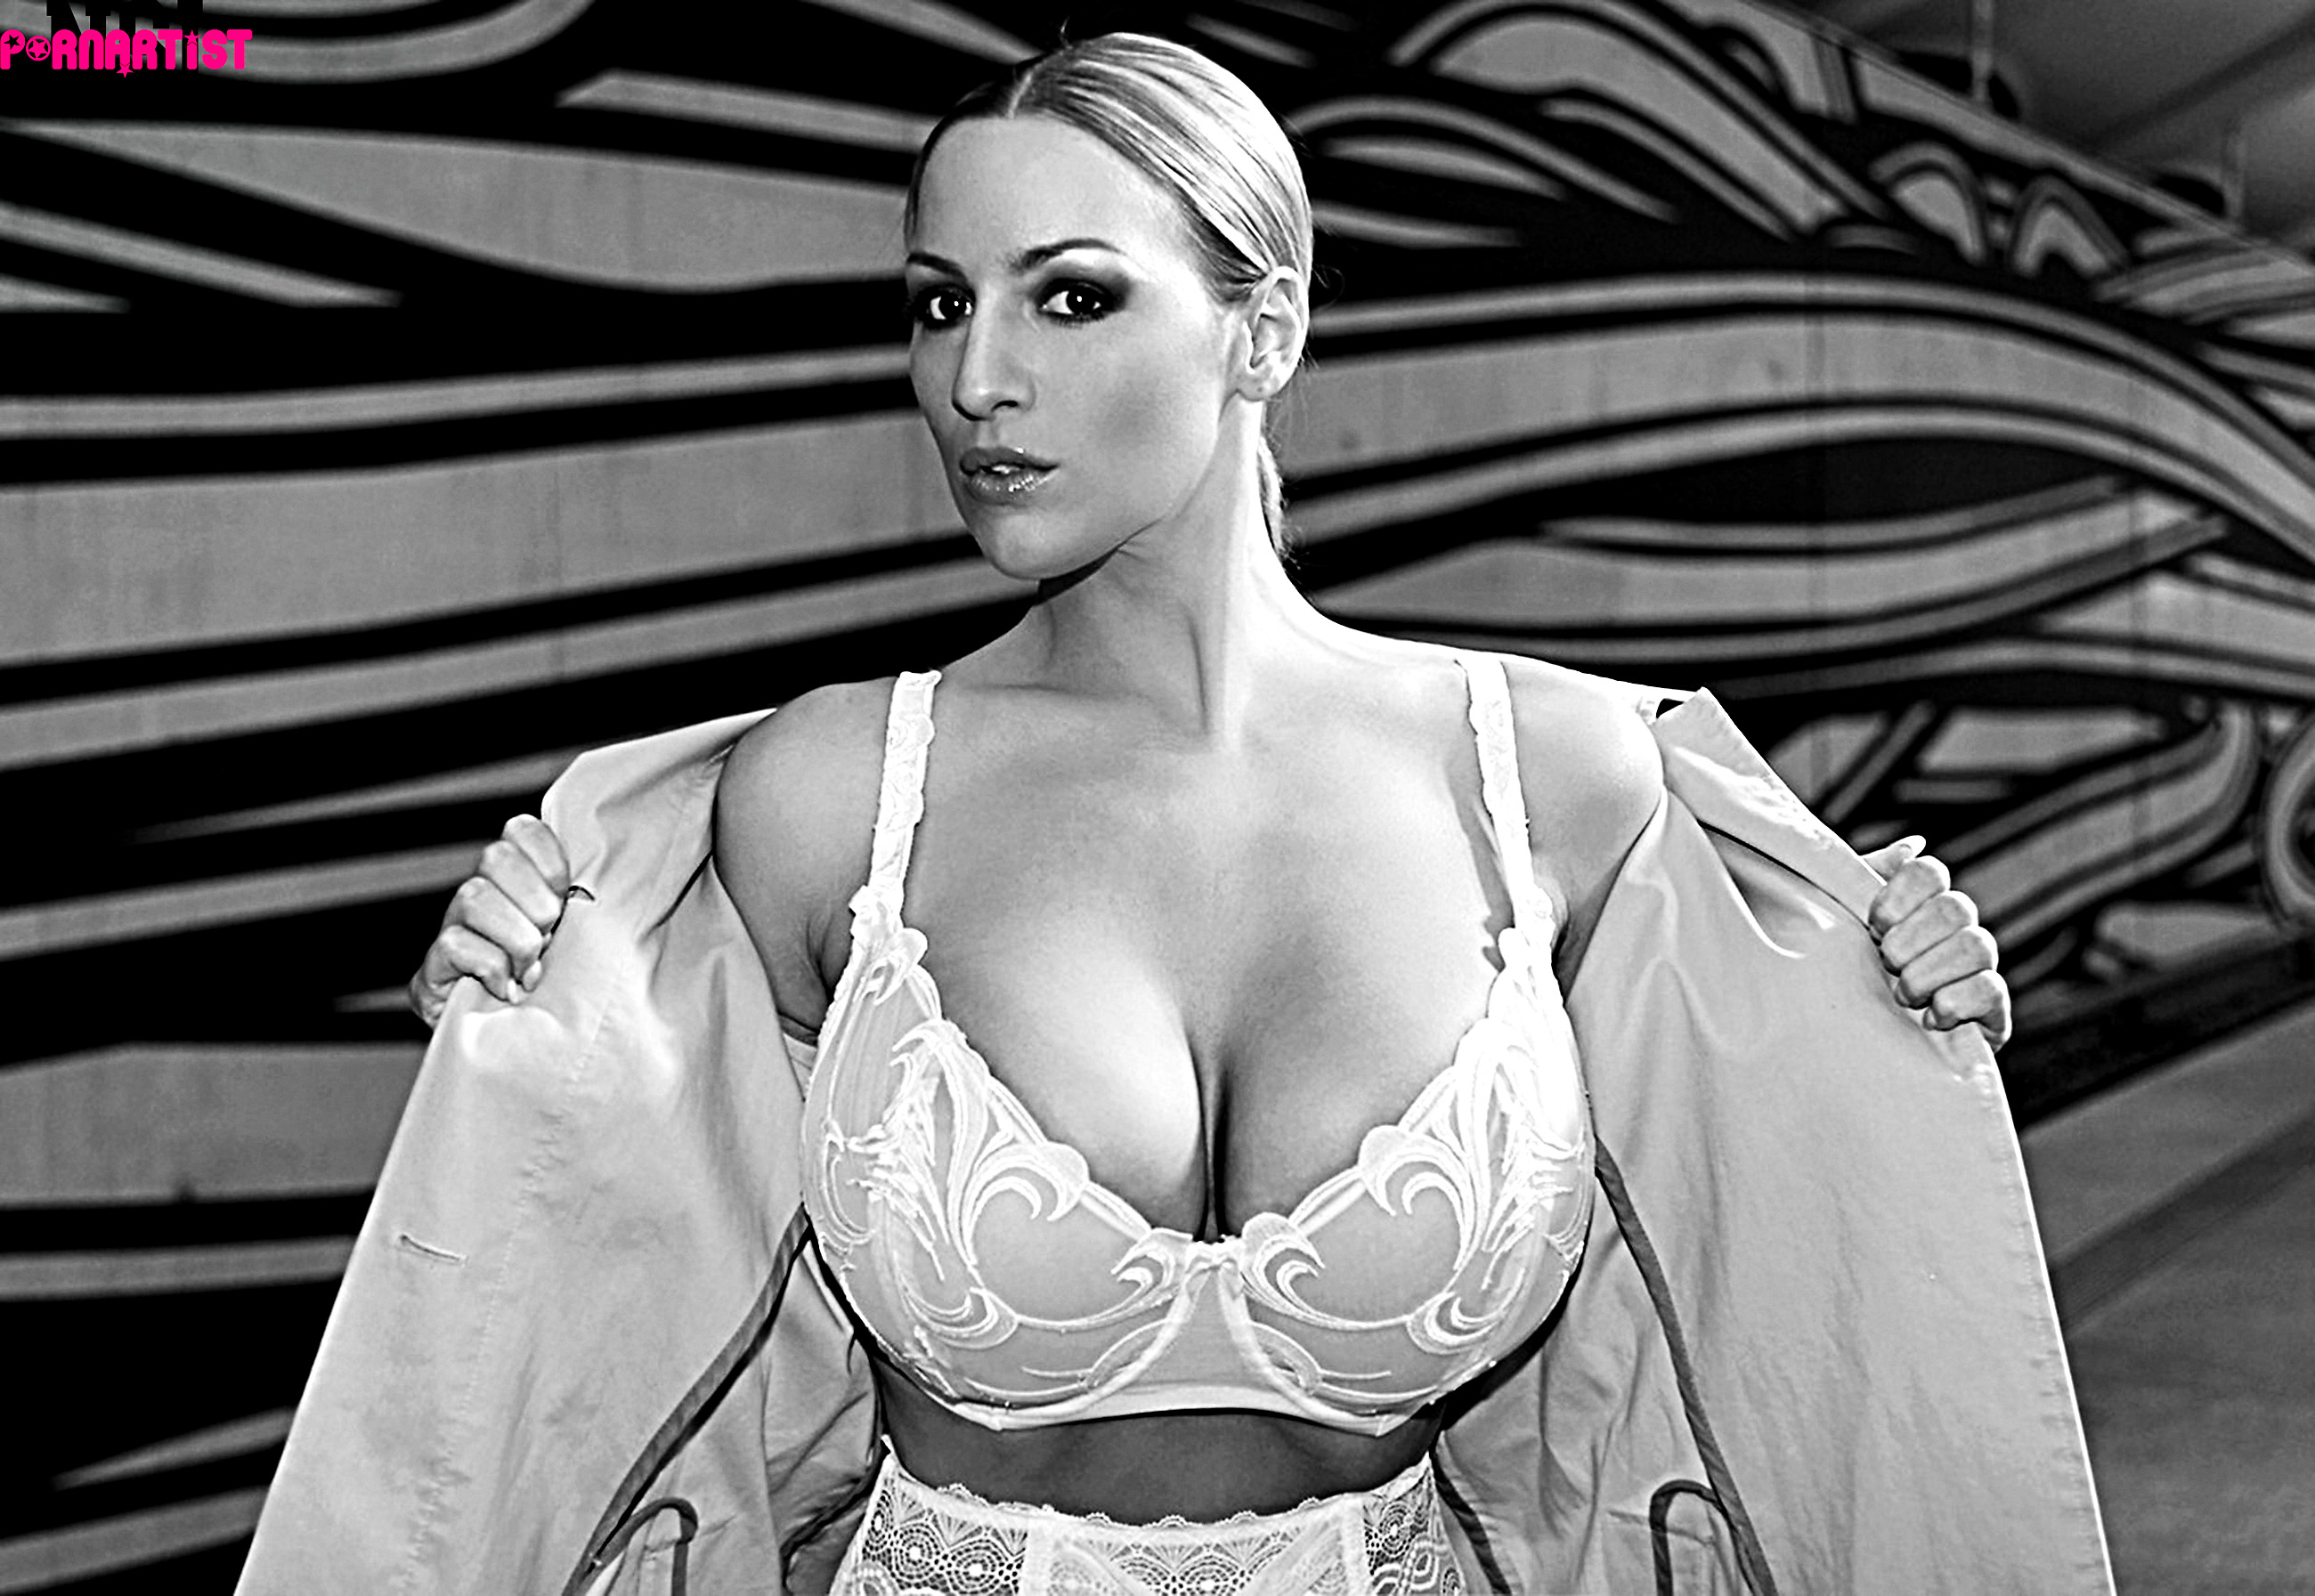 Black And White Big Tits - Jordan Carver busty big tits babe showing her bra in a black ...